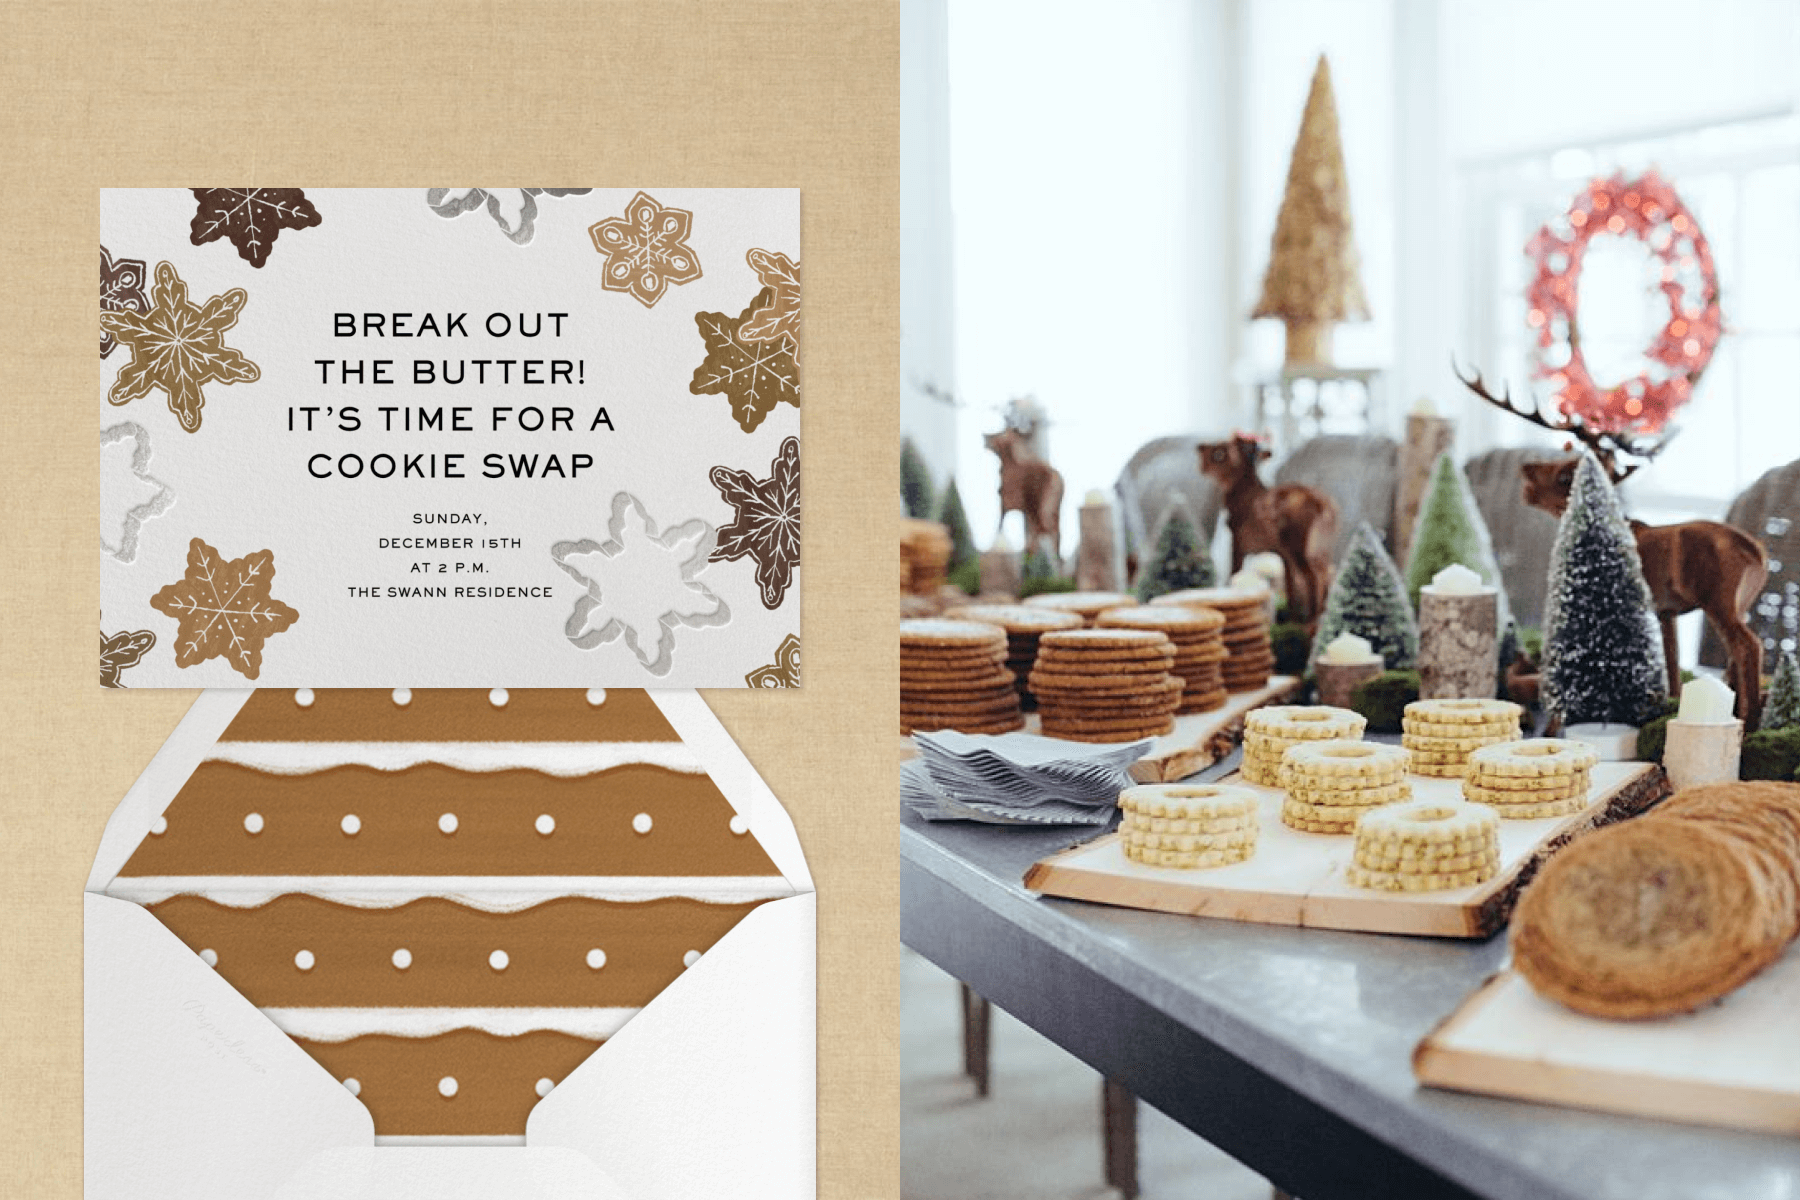 A cookie swap invitation with snowflake-shaped cookies and cookie cutters; a table with different varieties of stacked cookies, pipe cleaner trees, and deer decorations.